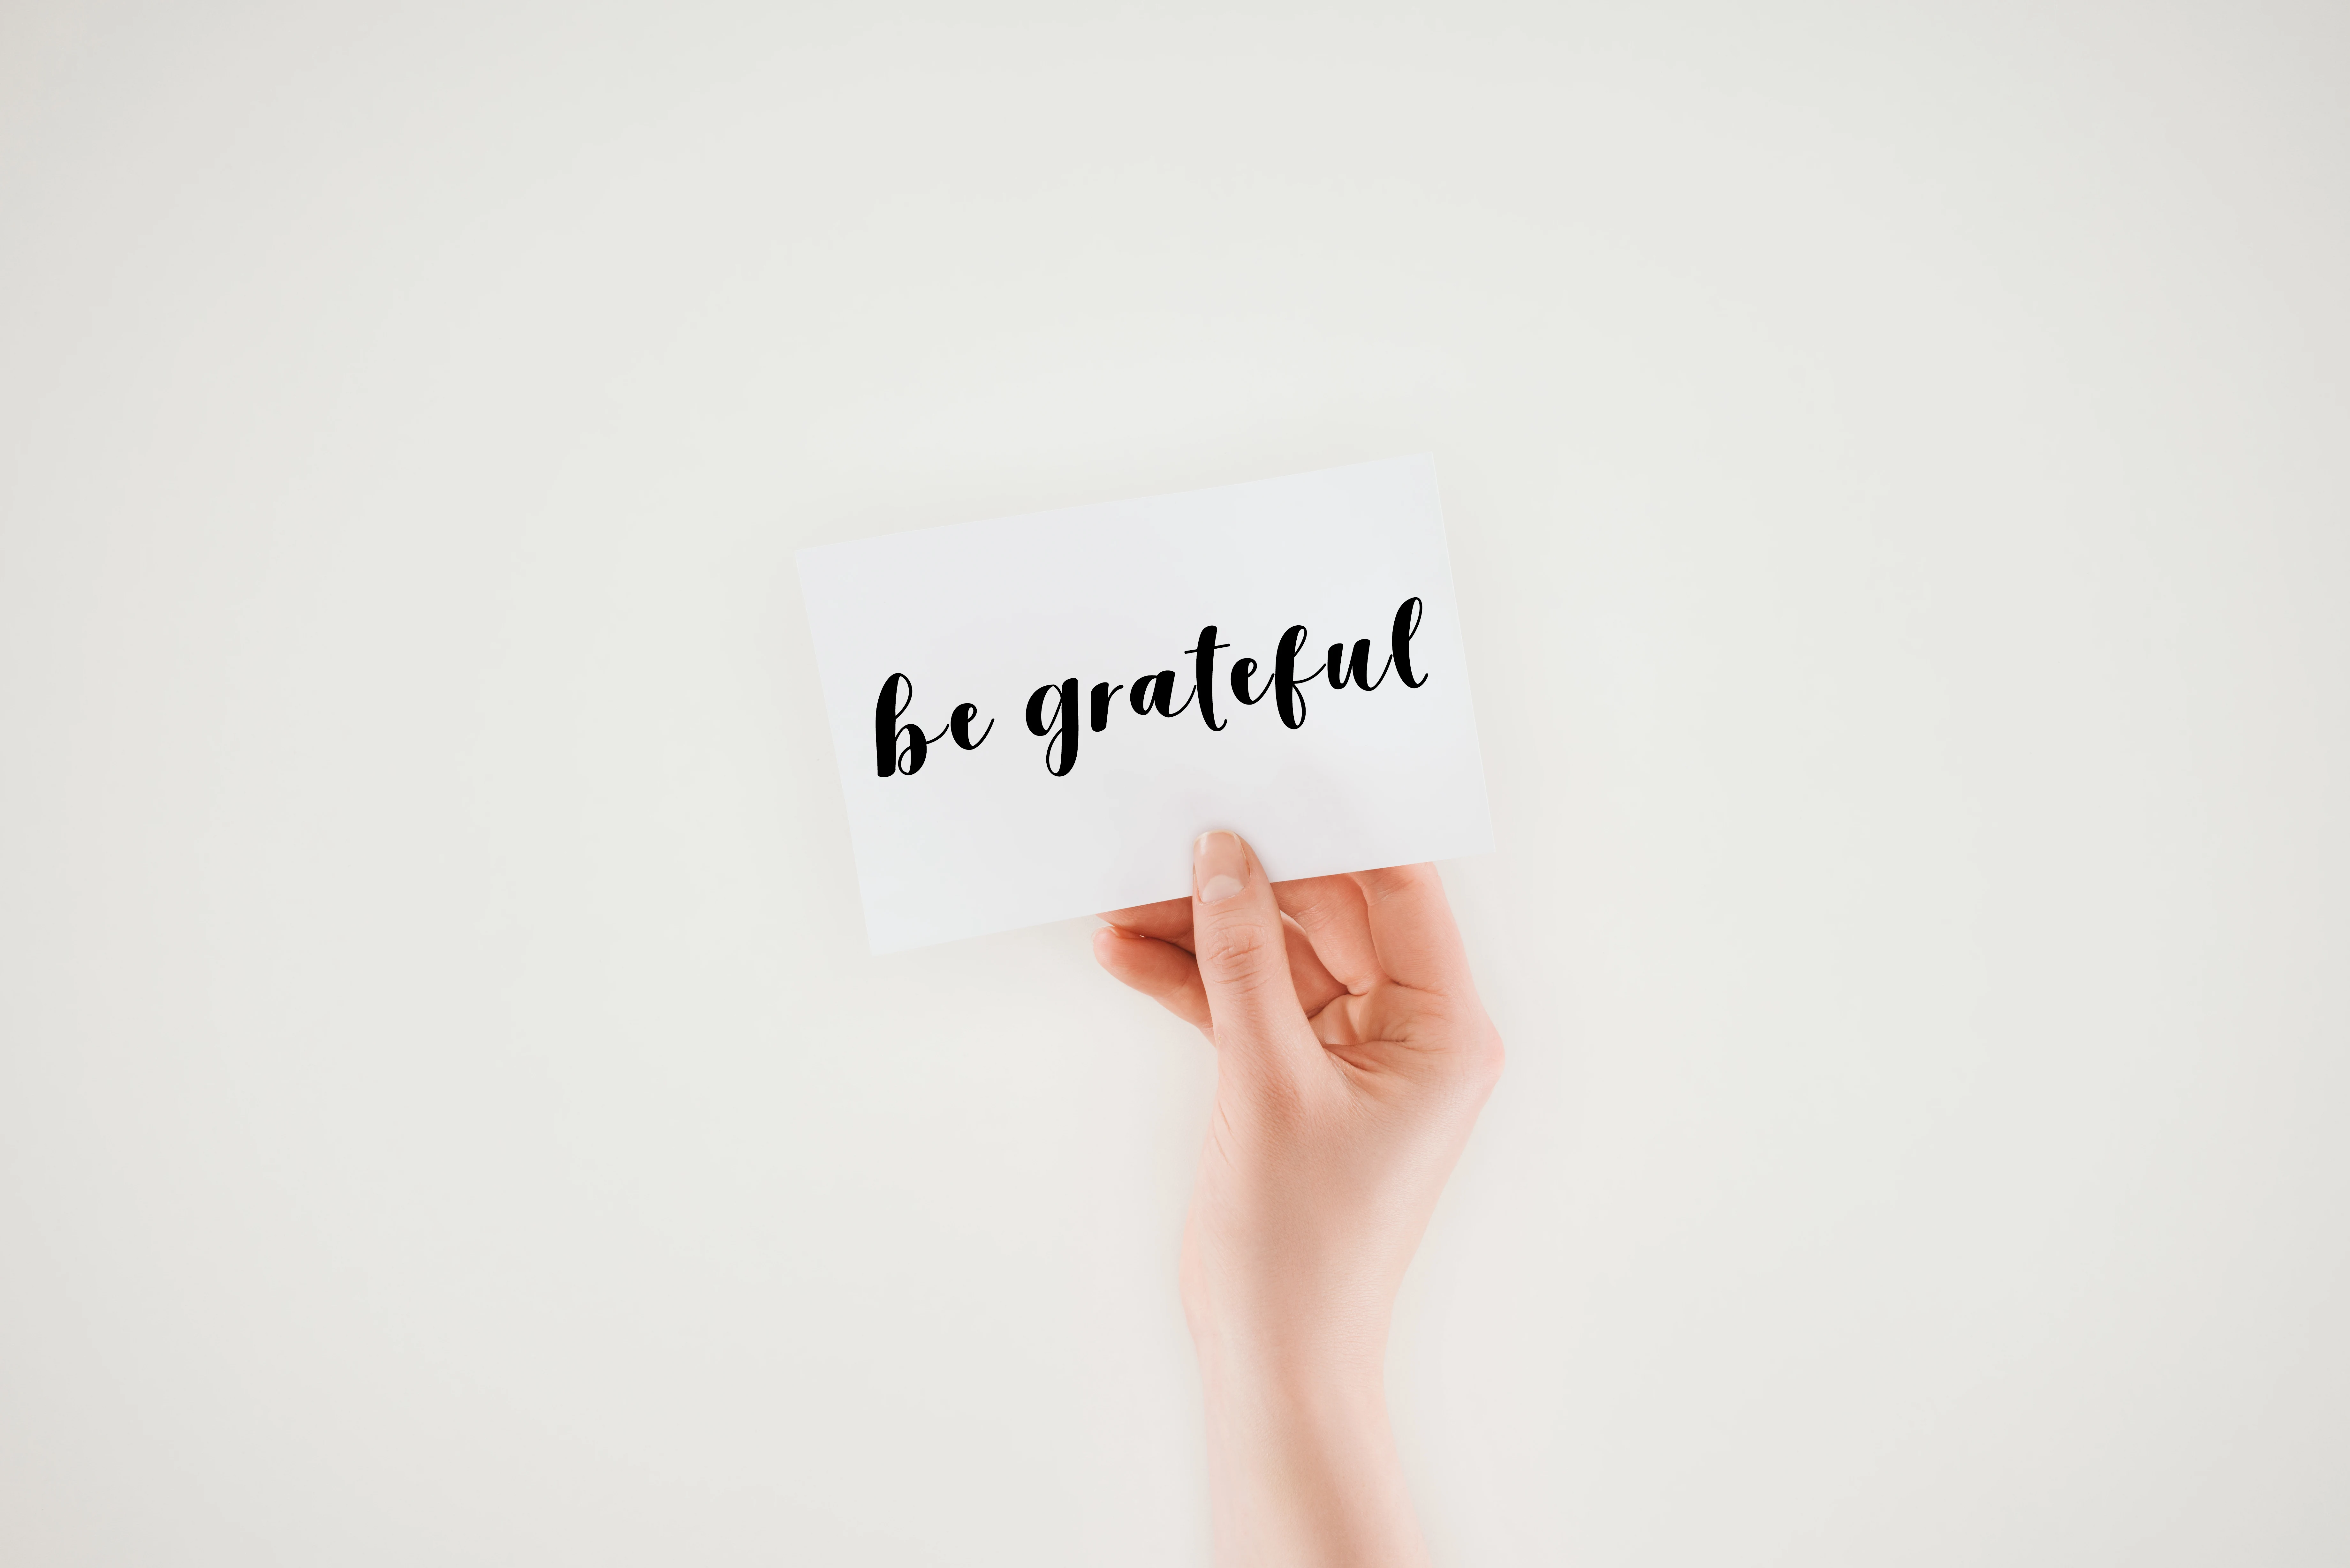 Finding things to be grateful for every day can seem daunting, especially on bad days. This list will help you to be thankful today and every day!